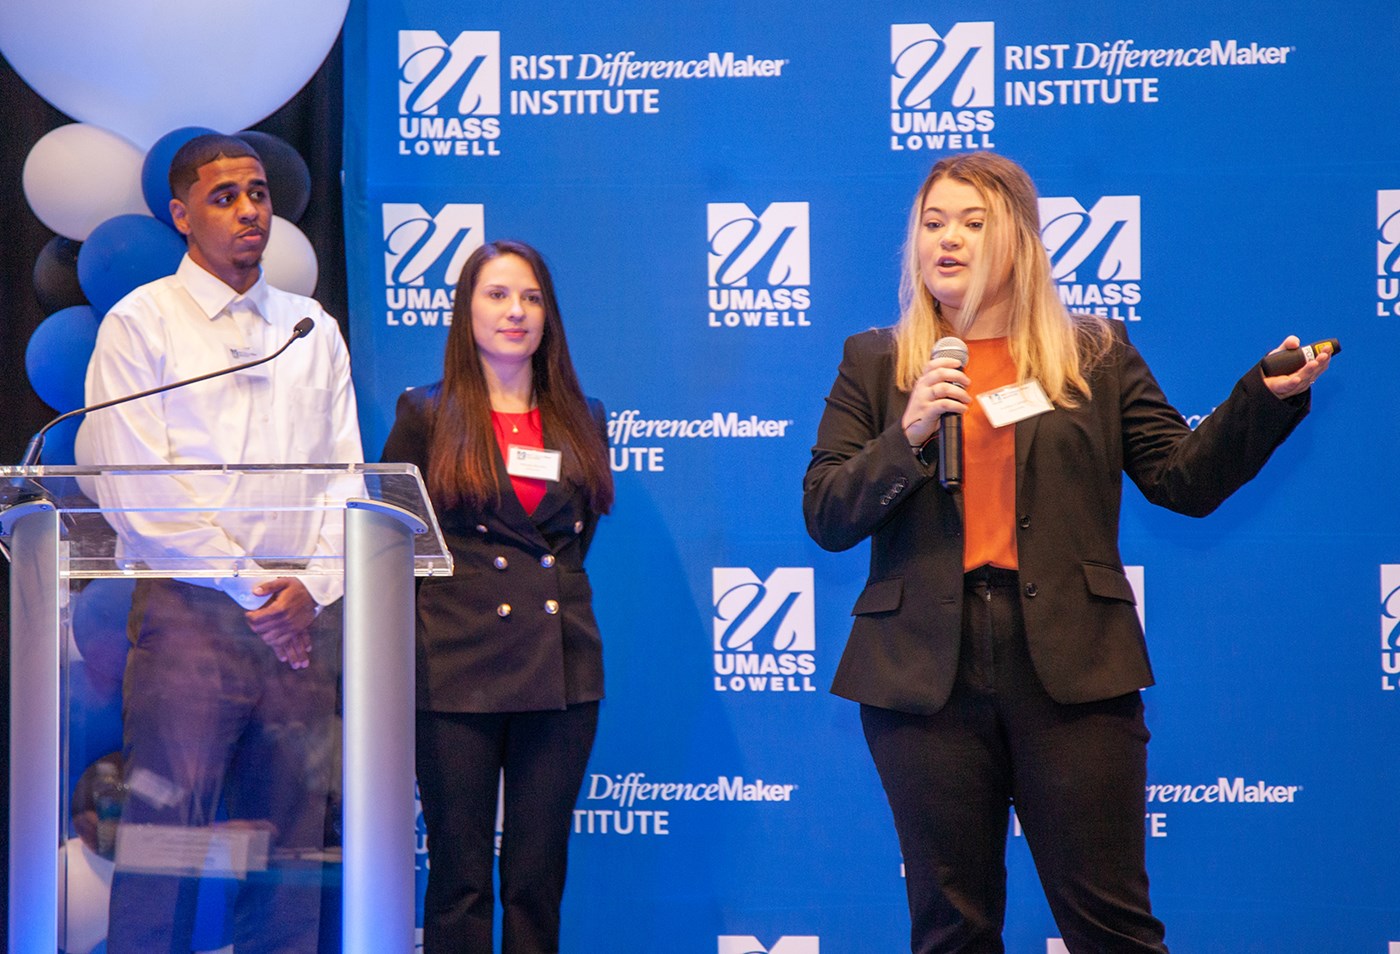 One of the members USuccess team holding a microphone and speaking in front of blue UMass Lowell backdrop while two other members watch.